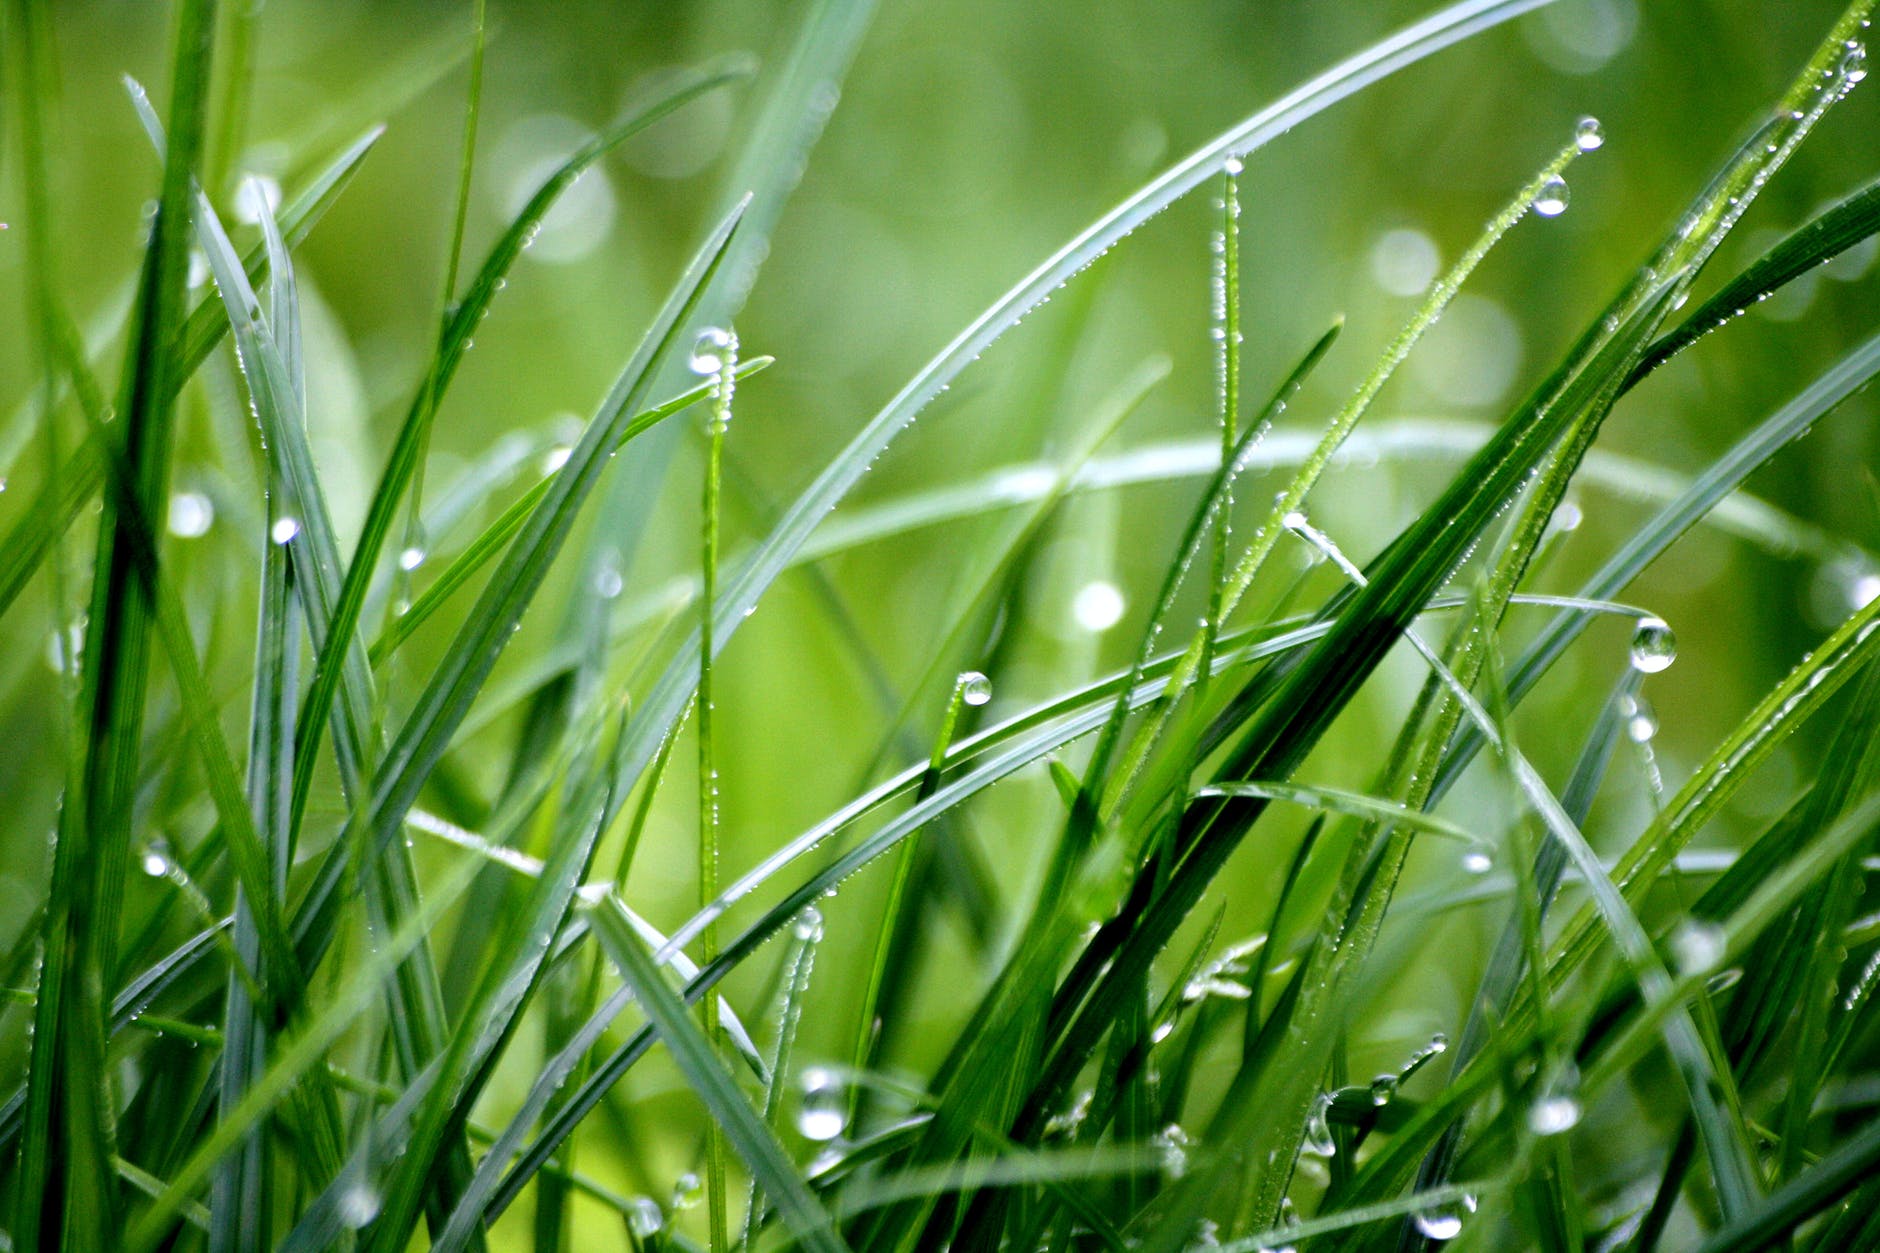 macro photography of droplets on grass